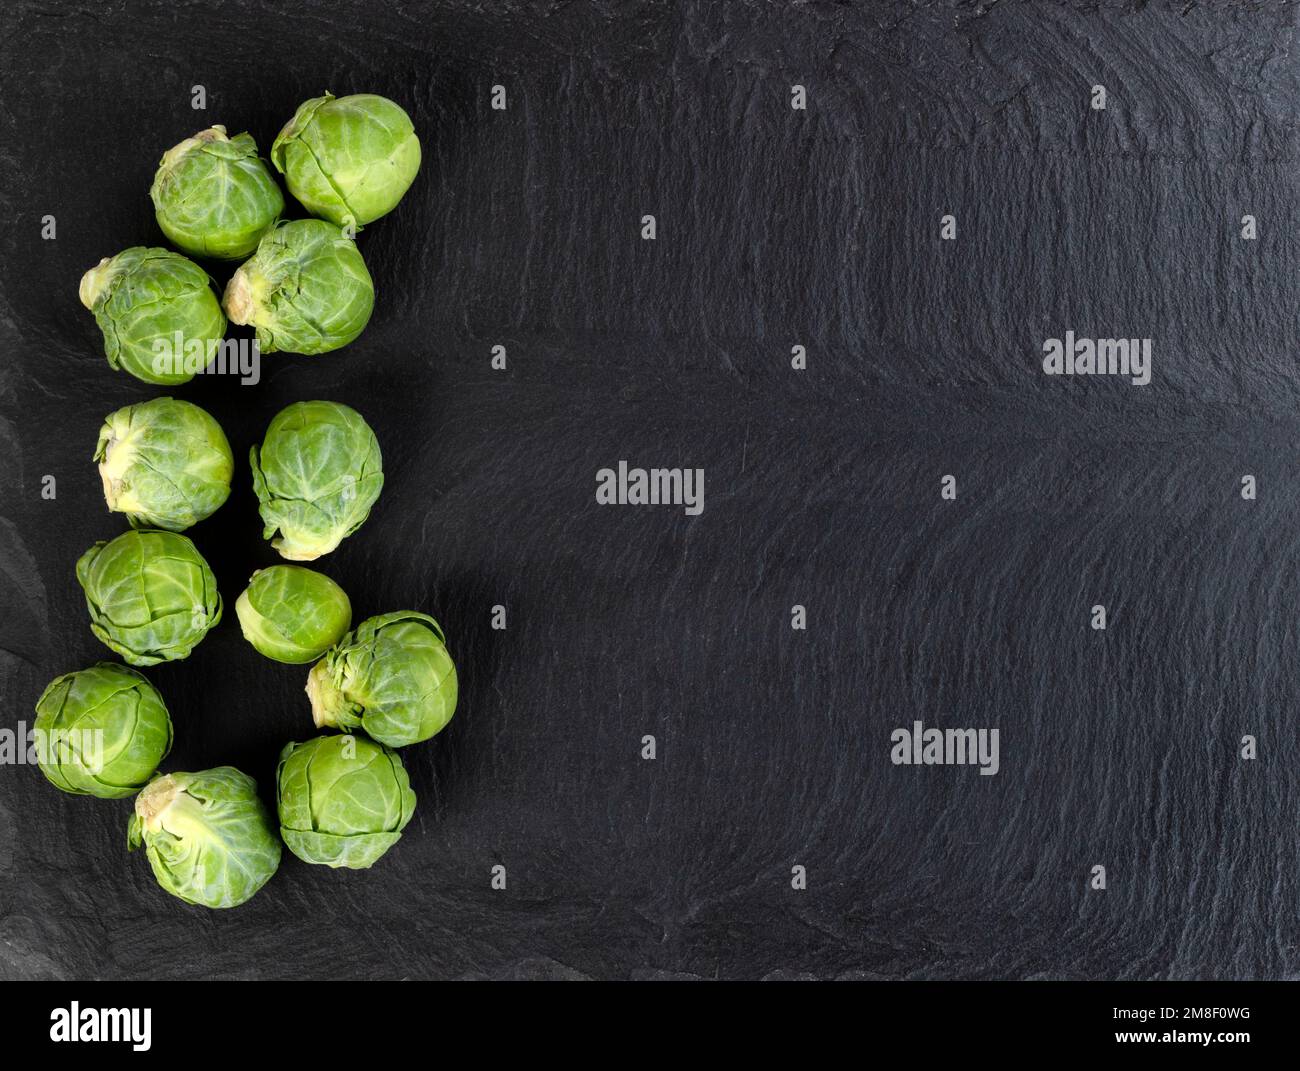 Fresh raw organic brussel sprouts on black stone background in flat lay view Stock Photo